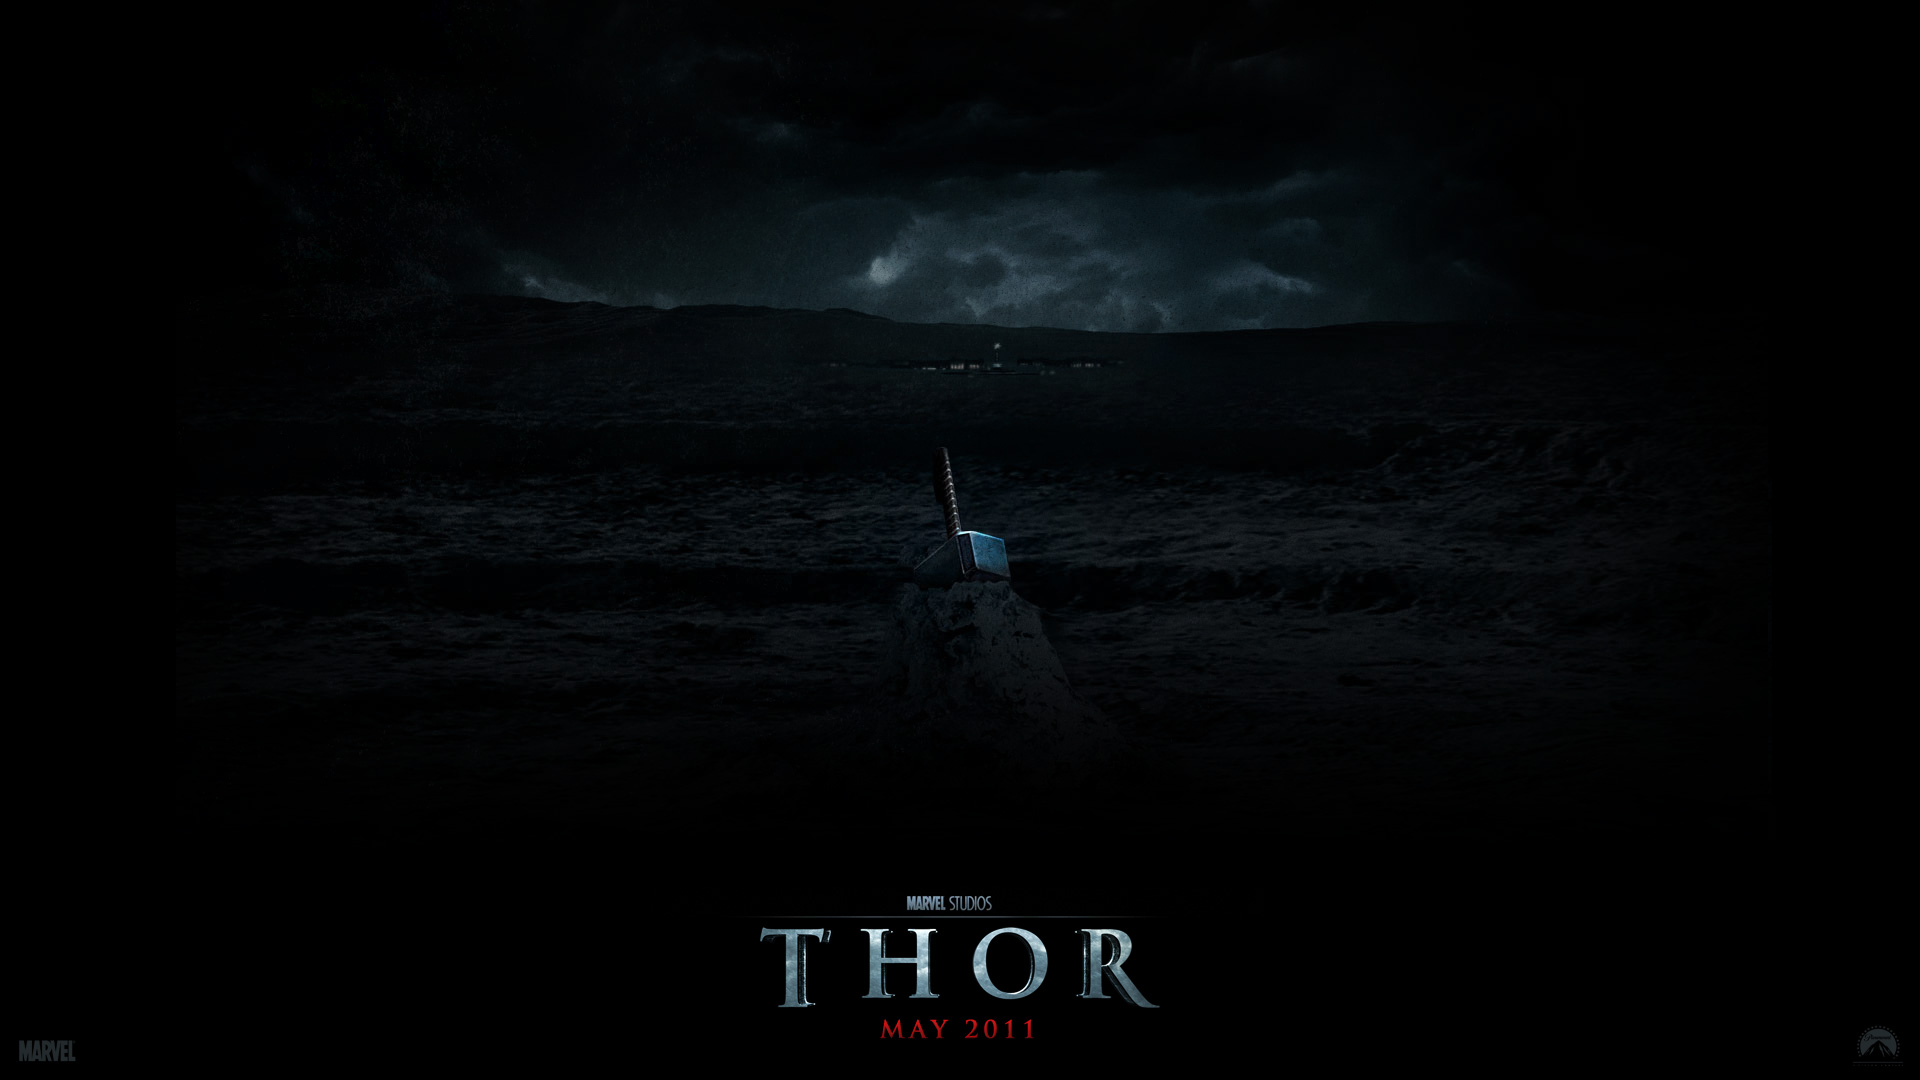 Thors hammer from the Marvel Studios movie Thor wallpaper 1920x1080